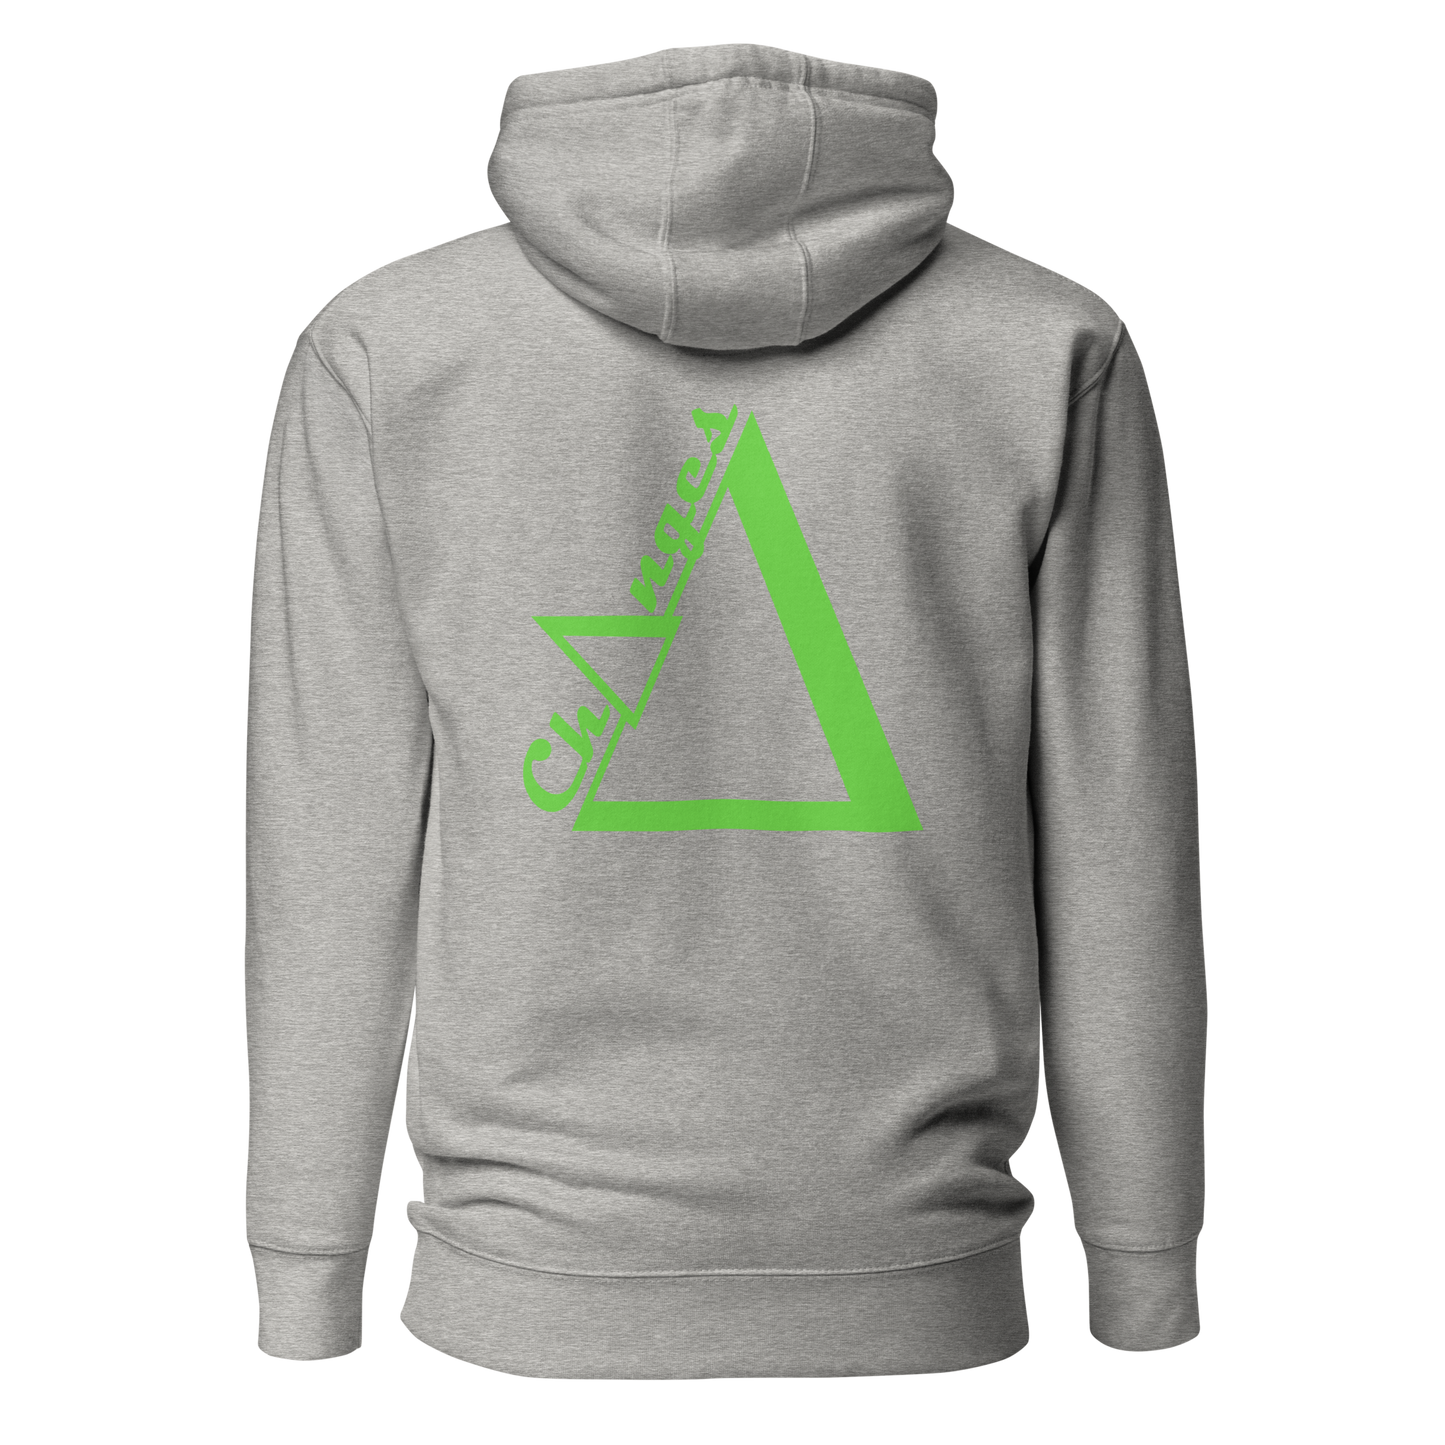 Changes White /Green/Gray Hoodie